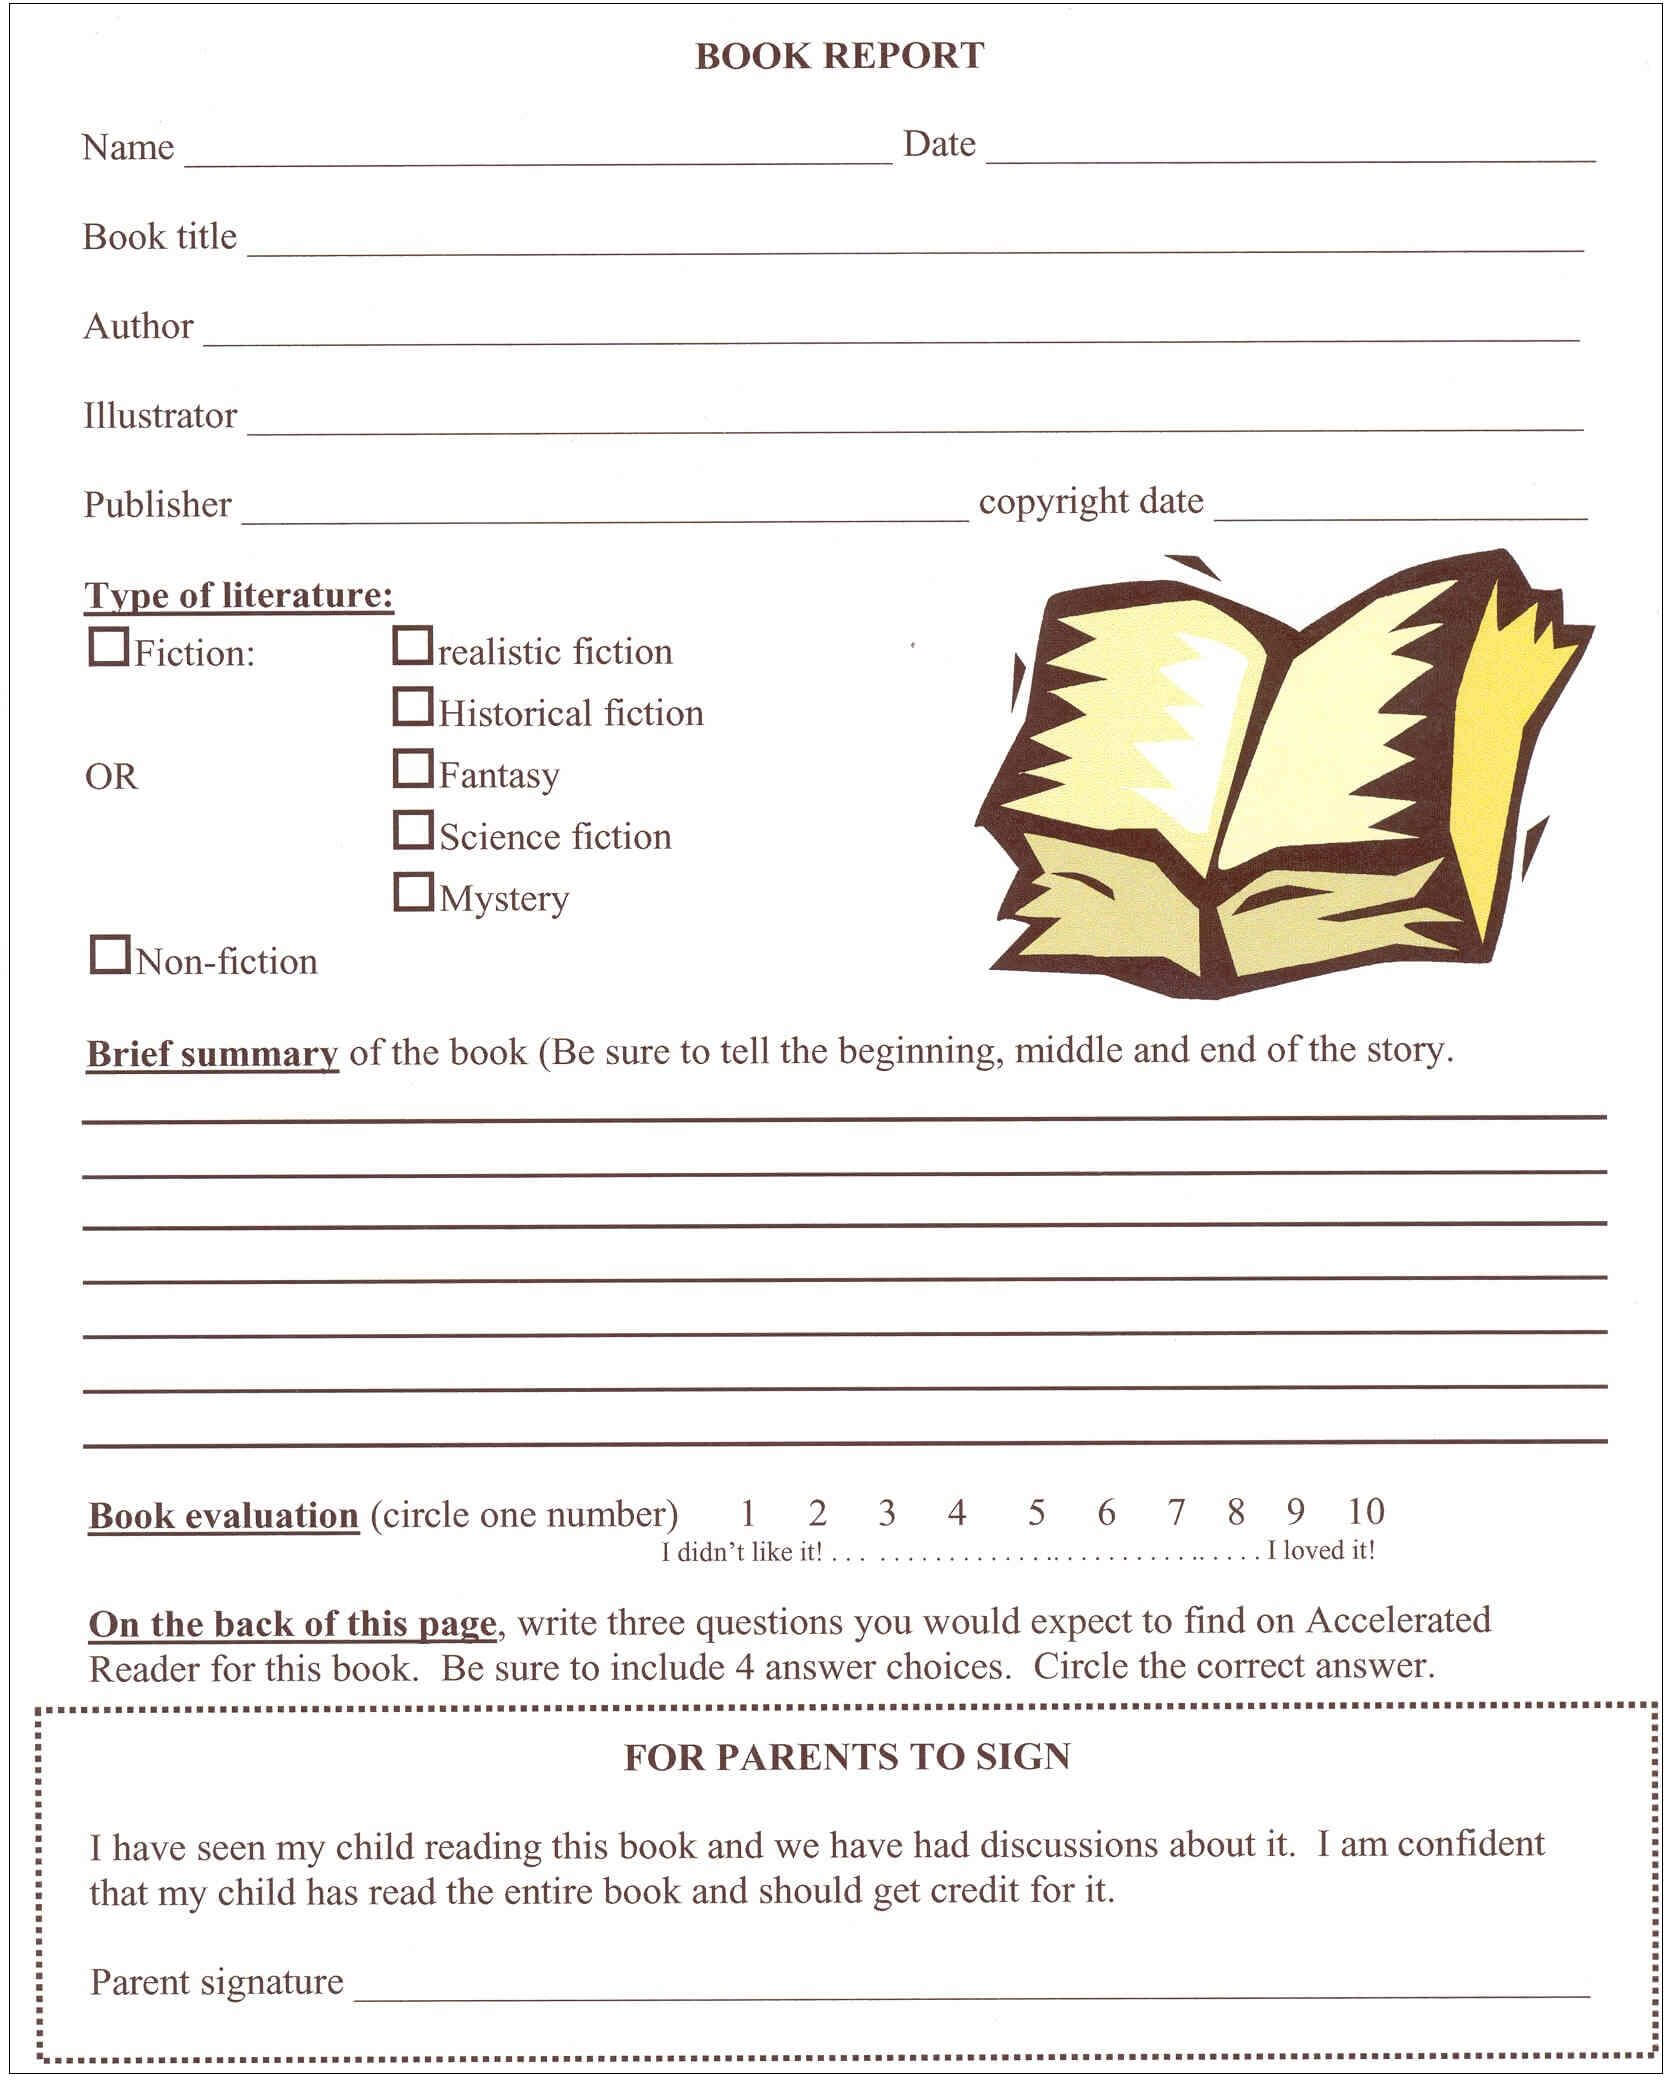 Image Result For 6Th Grade Book Report Format | Book Report Within Ar Report Template